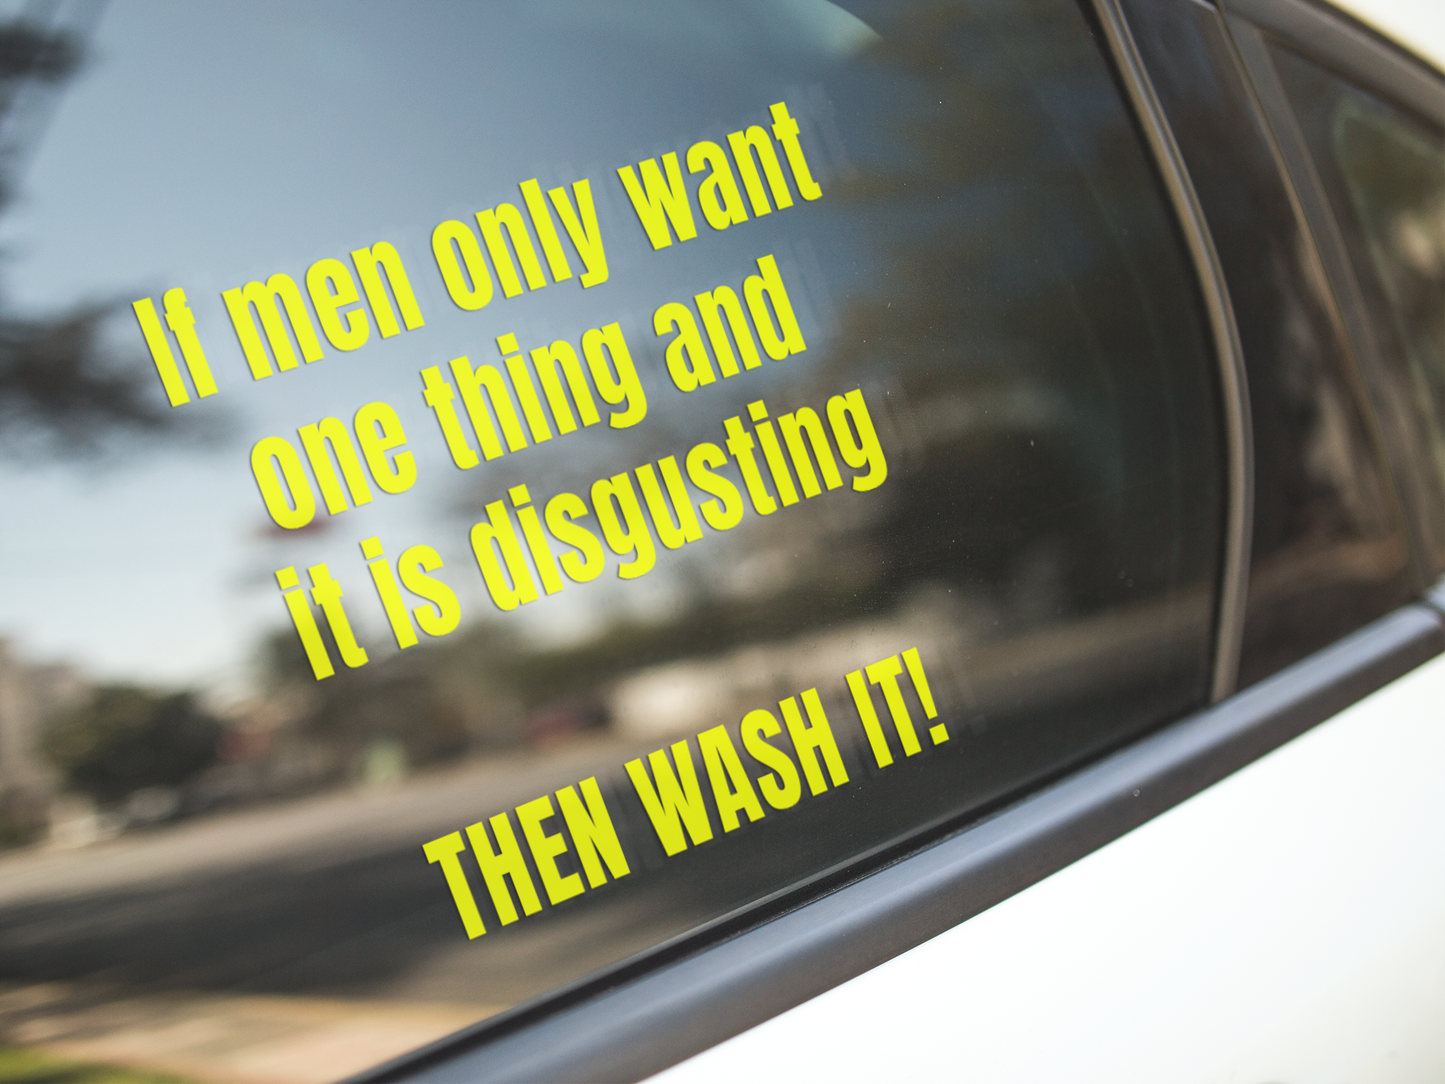 If men only want one thing and it's disgusting, then WASH IT - Vinyl sticker